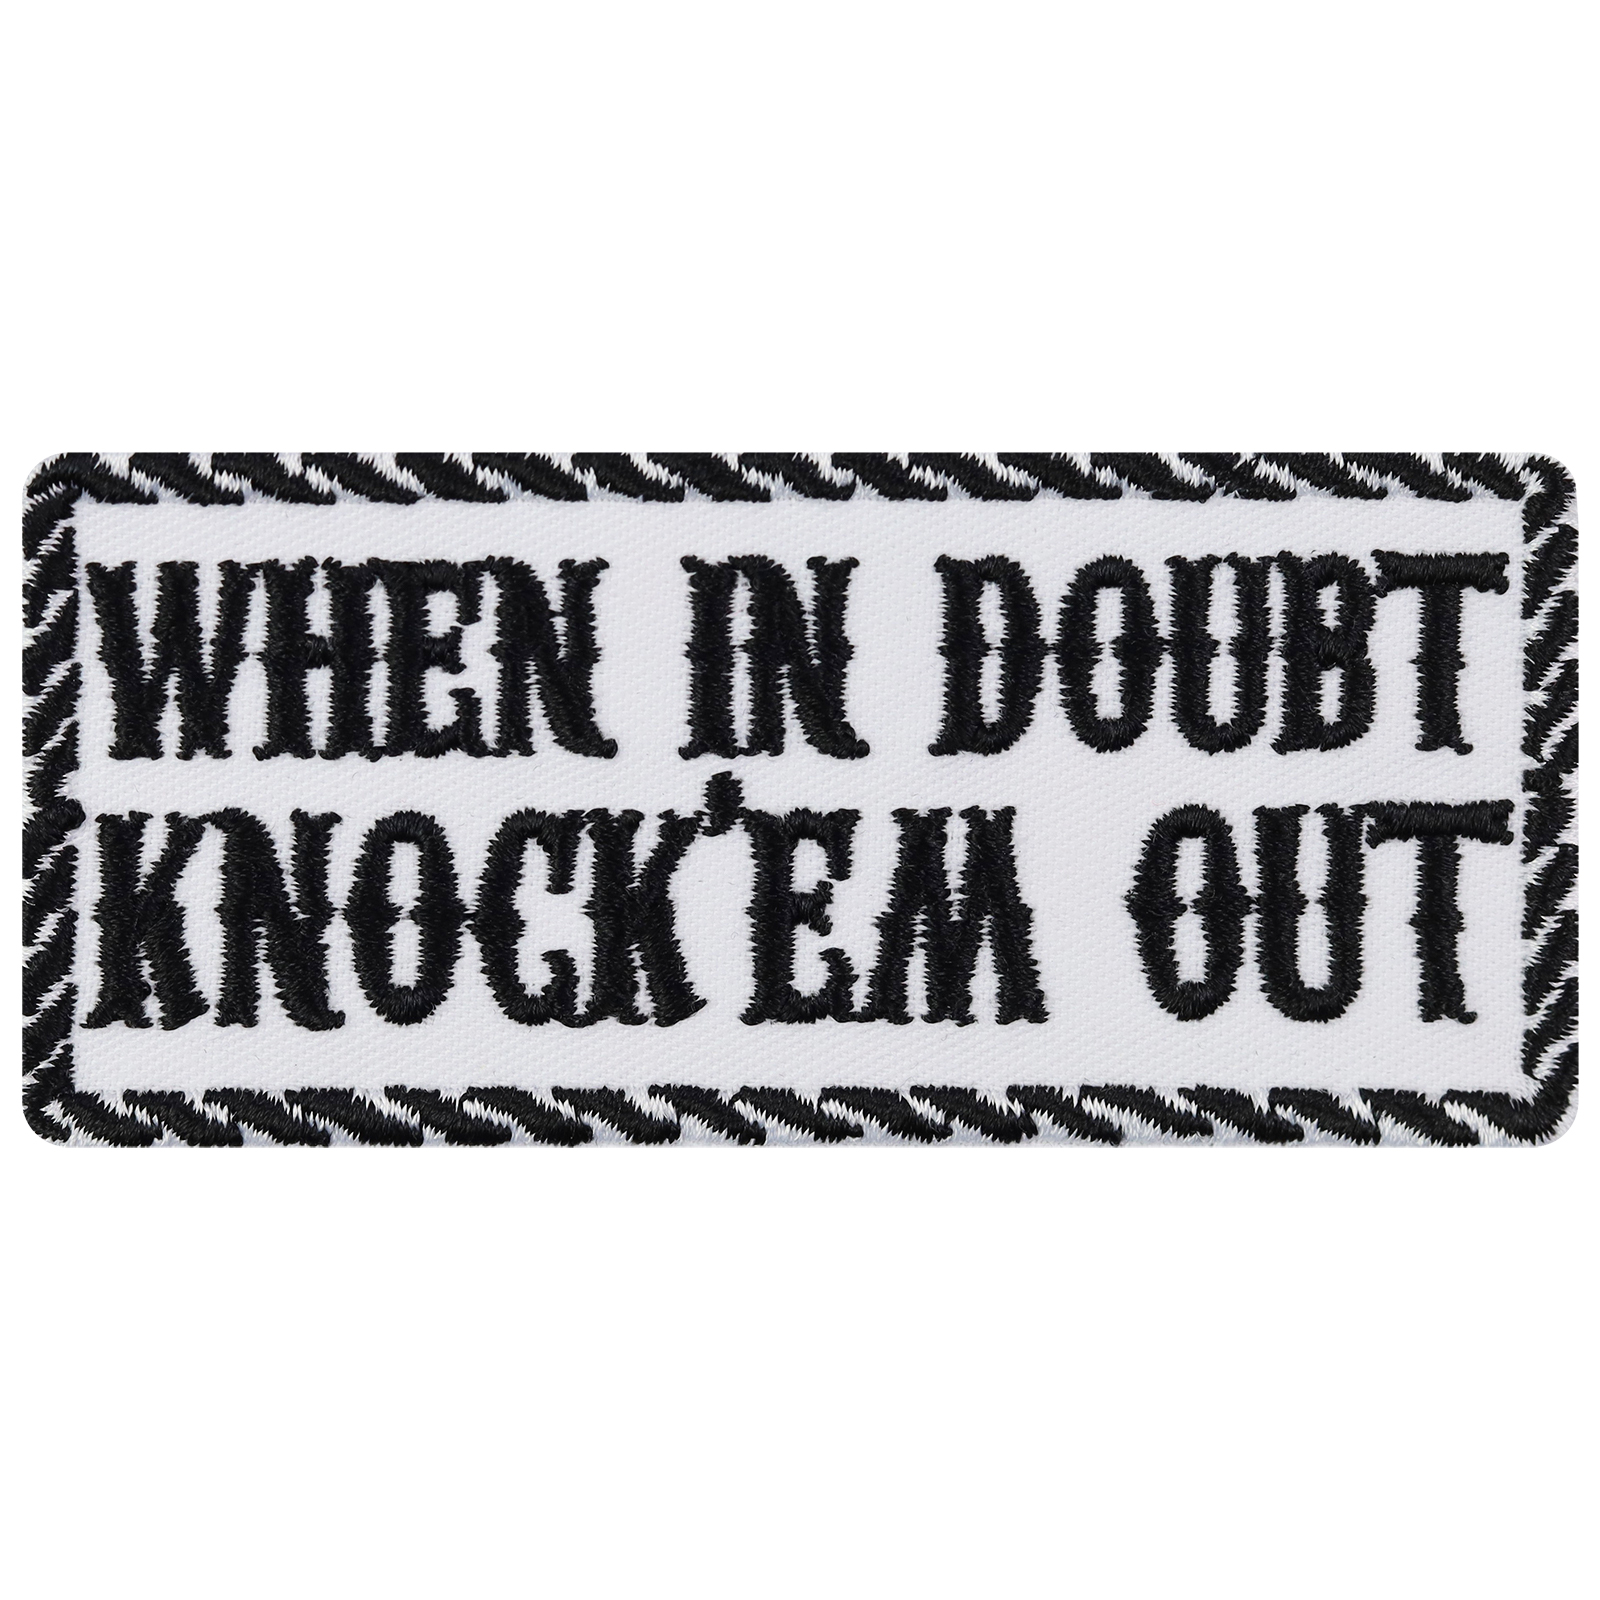 When in doubt knock'em out - Patch